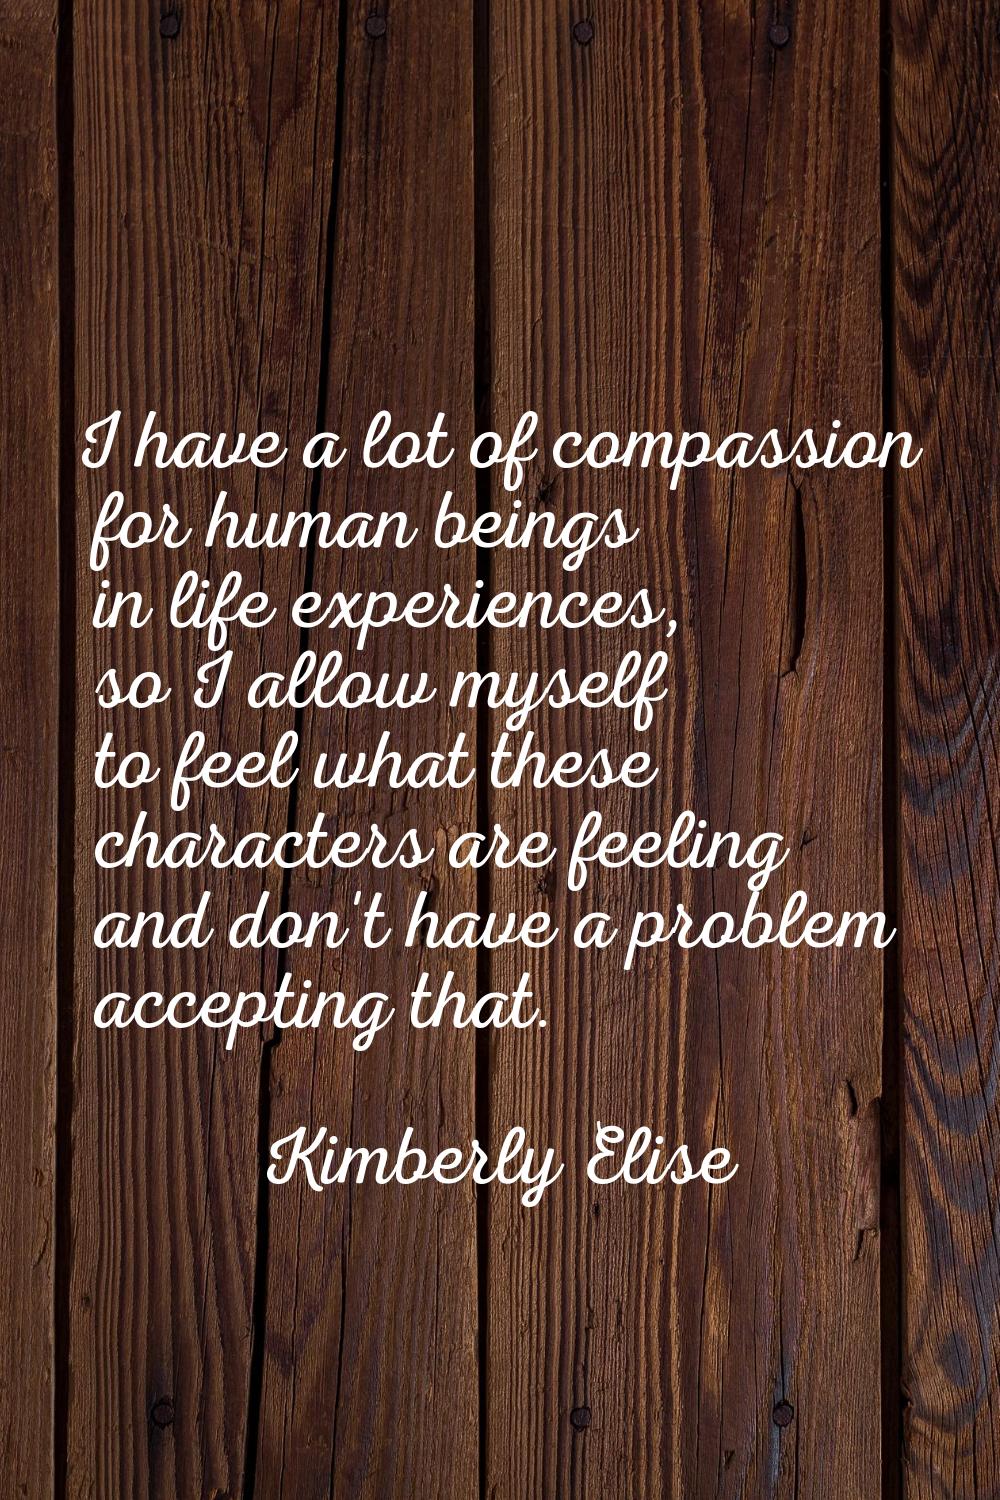 I have a lot of compassion for human beings in life experiences, so I allow myself to feel what the